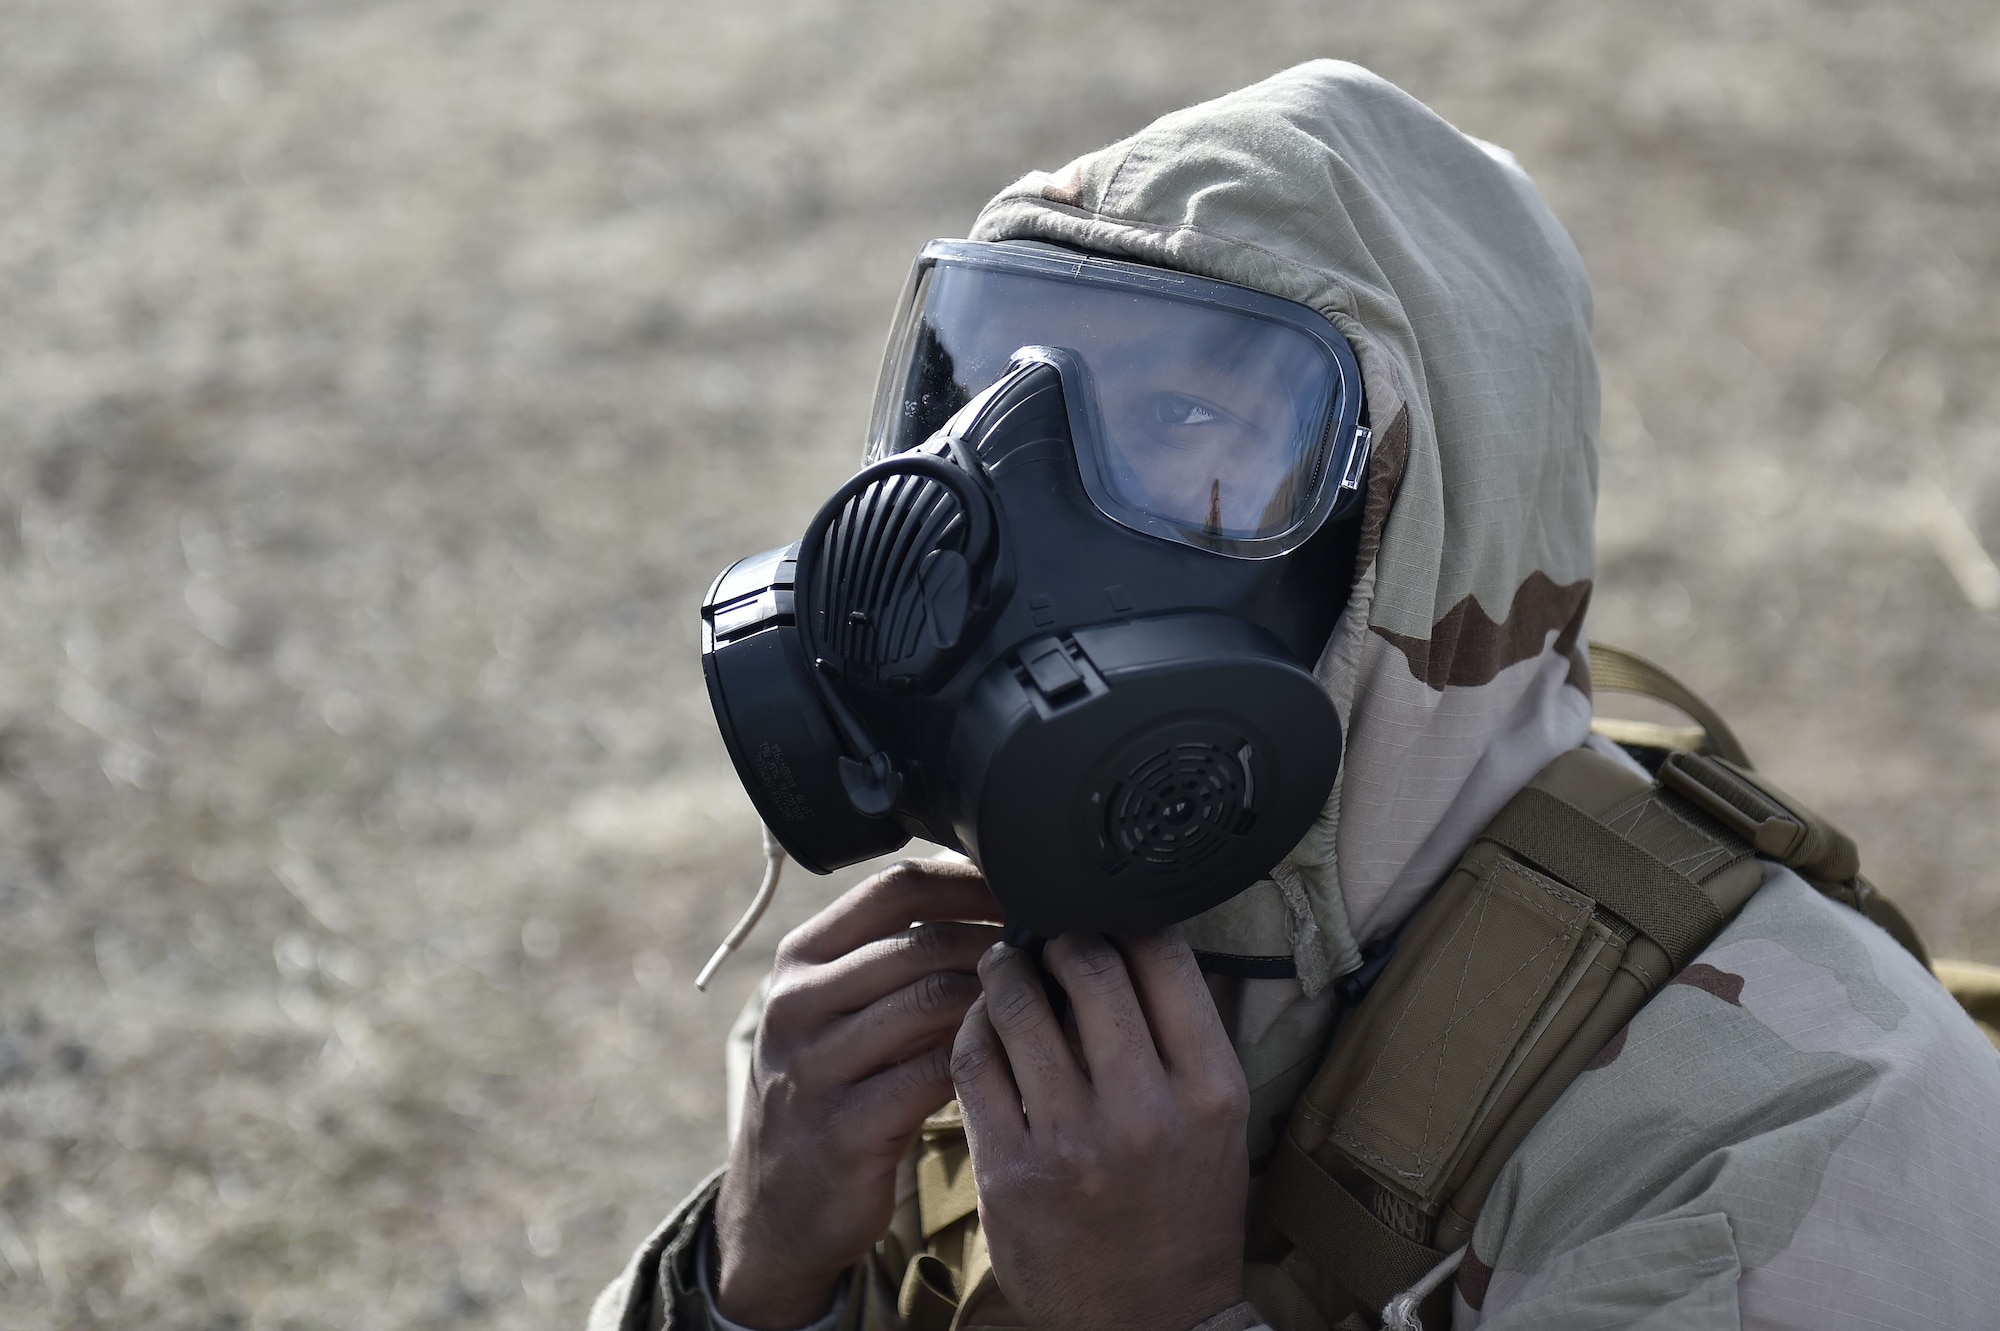 Senior Airman Devante Jenkins, 821st Contingency Response Squadron aerial porter, dons Mission Oriented Protective Posture gear during a simulated attack while deployed to Amedee Army Airfield, Calif., as part of a week-long readiness exercise, Feb. 1, 2018.  The exercise evaluated the Airmen’s readiness and ability to execute and sustain rapid global mobility around the world. (U.S. Air Force photo by Tech. Sgt. Liliana Moreno/Released)